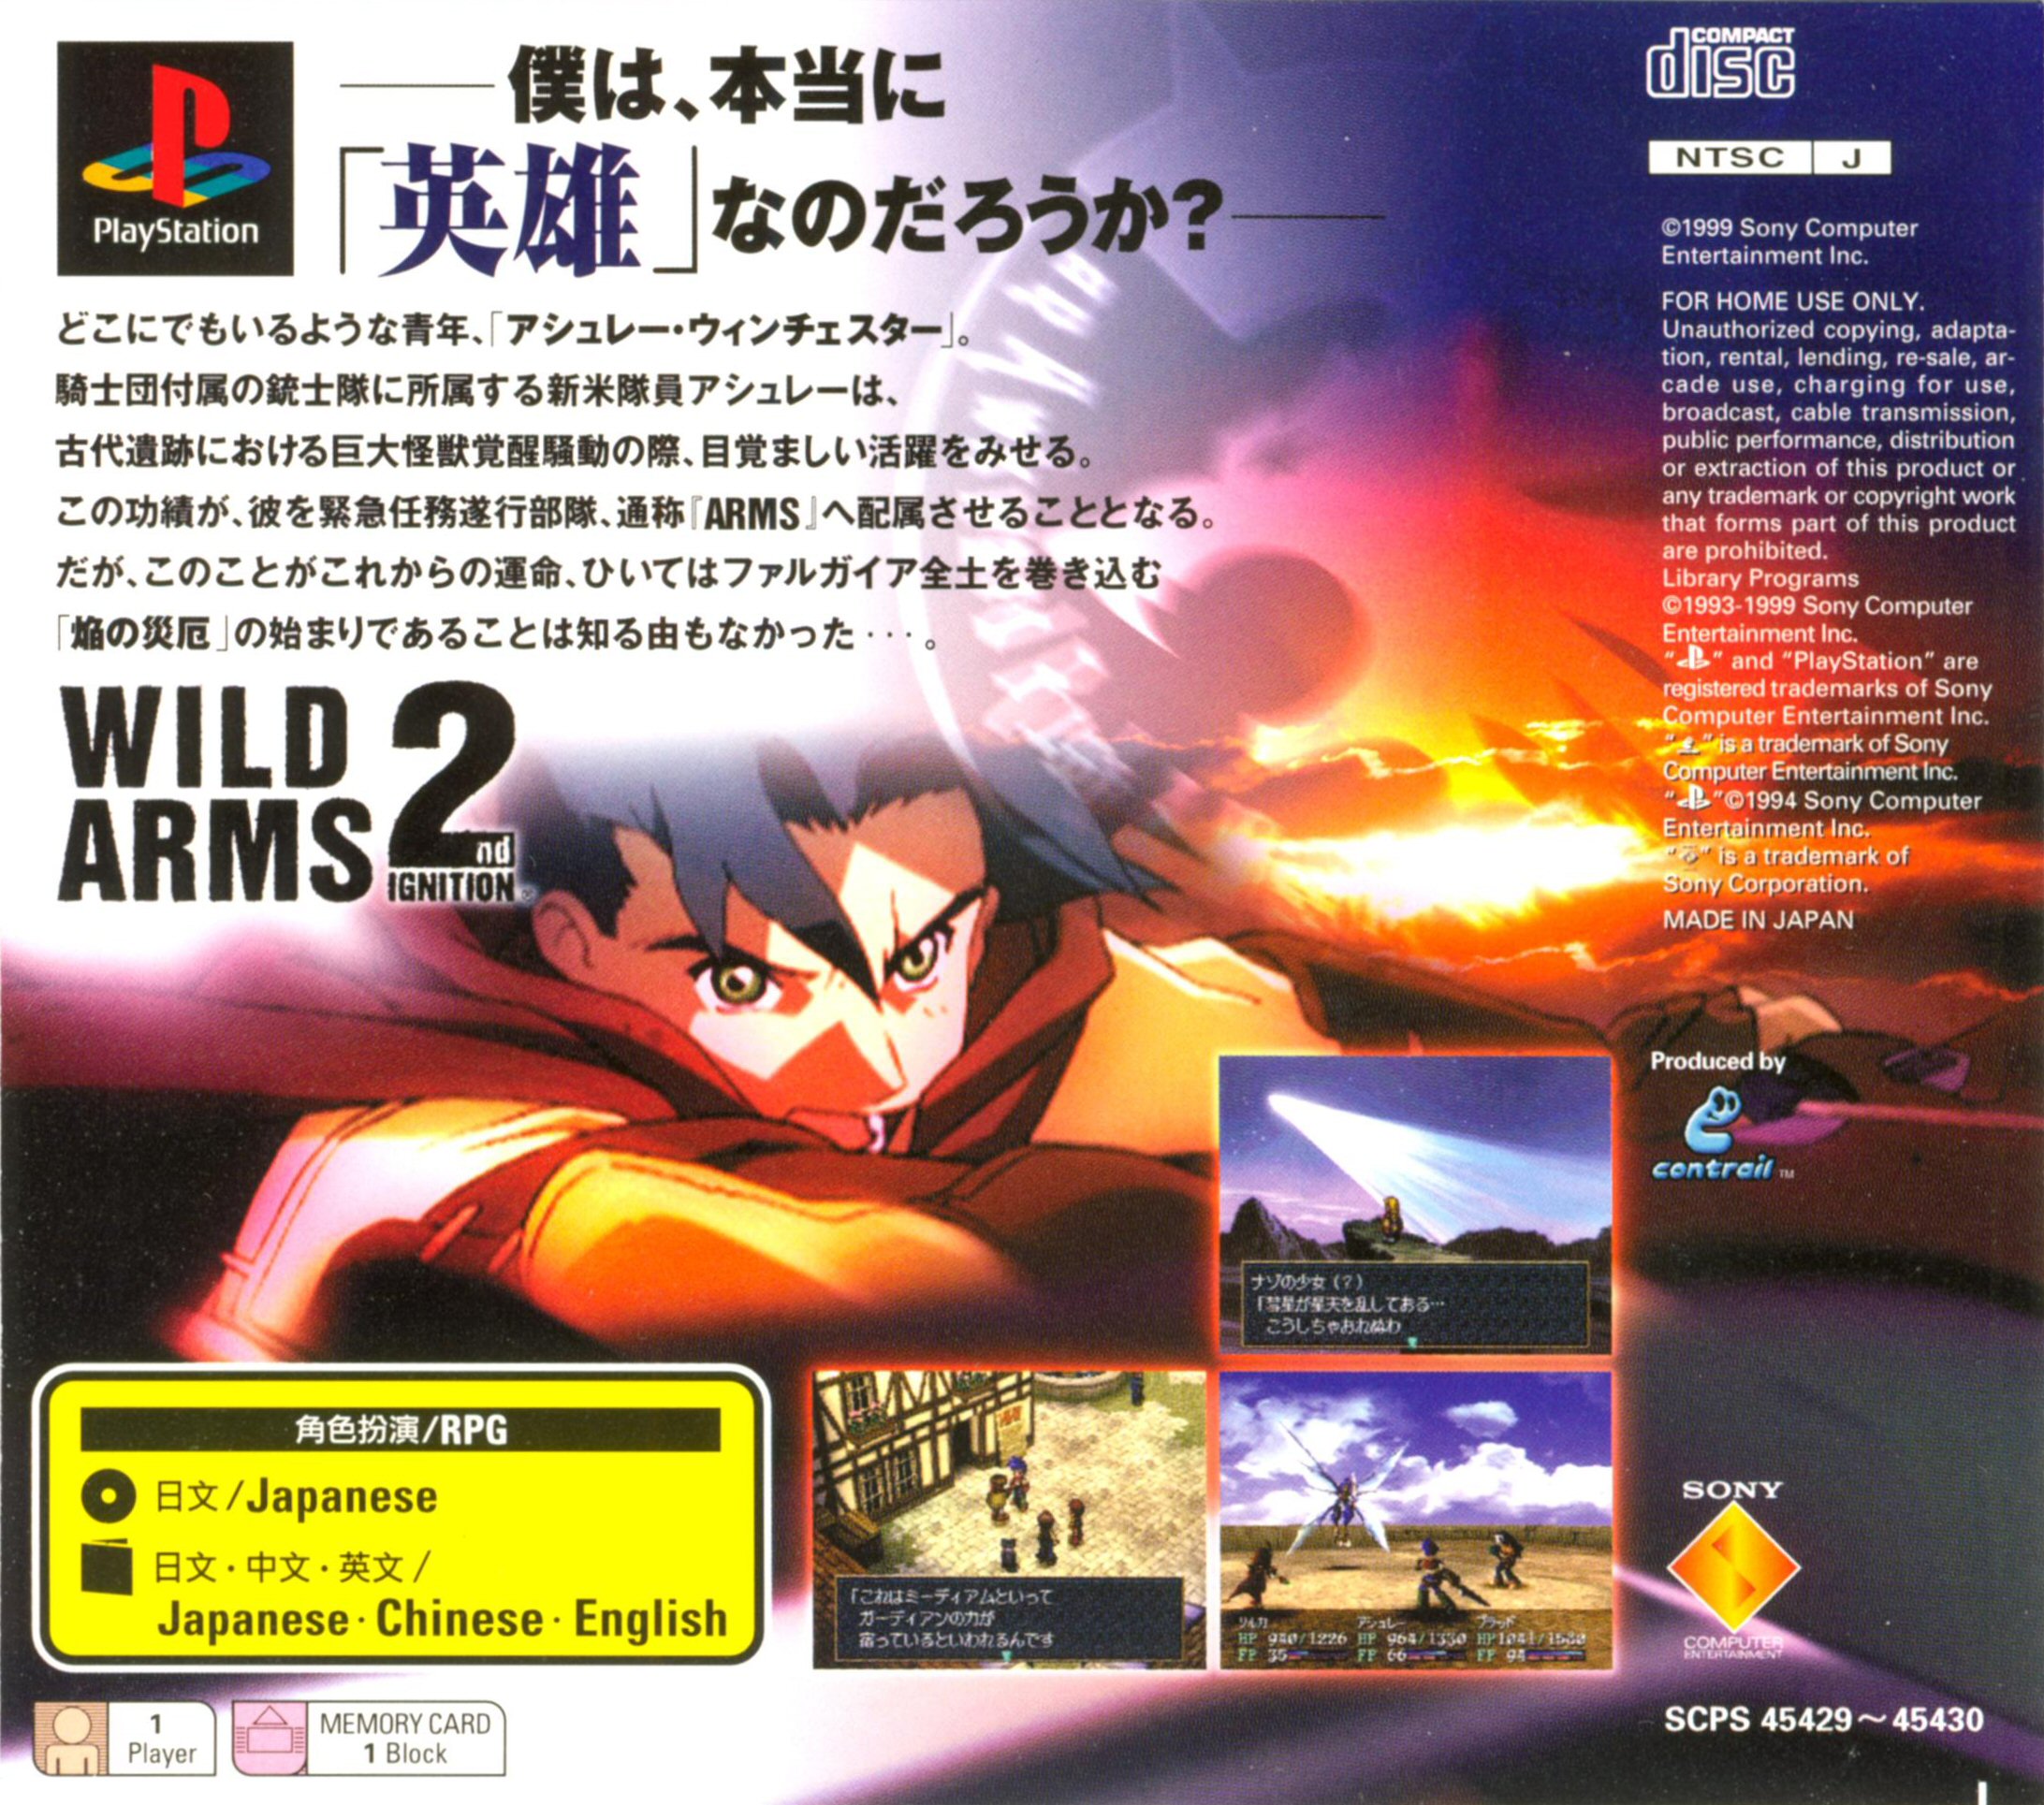 Wild Arms 2nd Ignition PSX cover